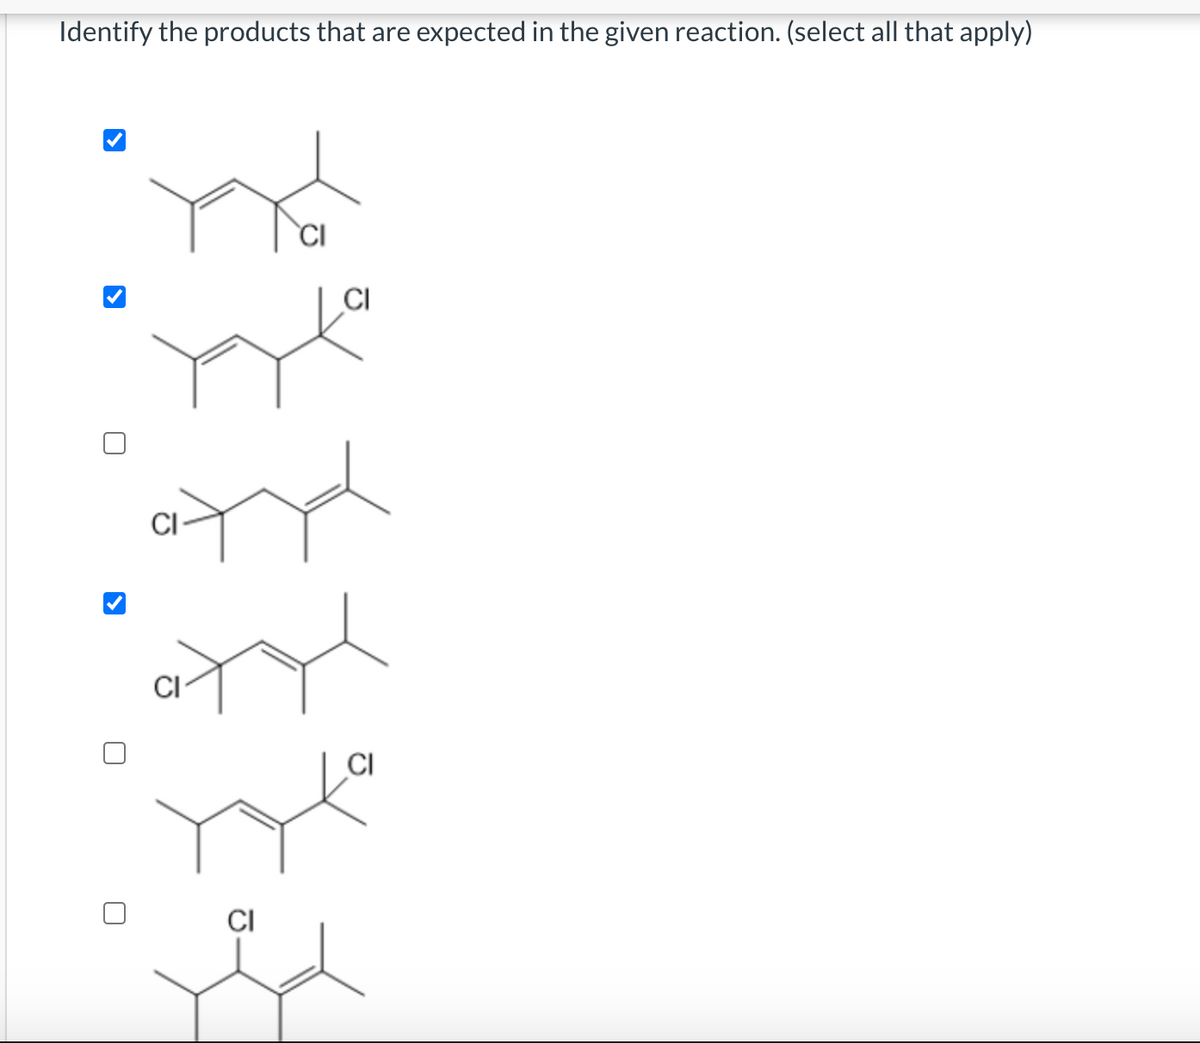 Identify the products that are expected in the given reaction. (select all that apply)
CI
CI
CI
CI
CI
